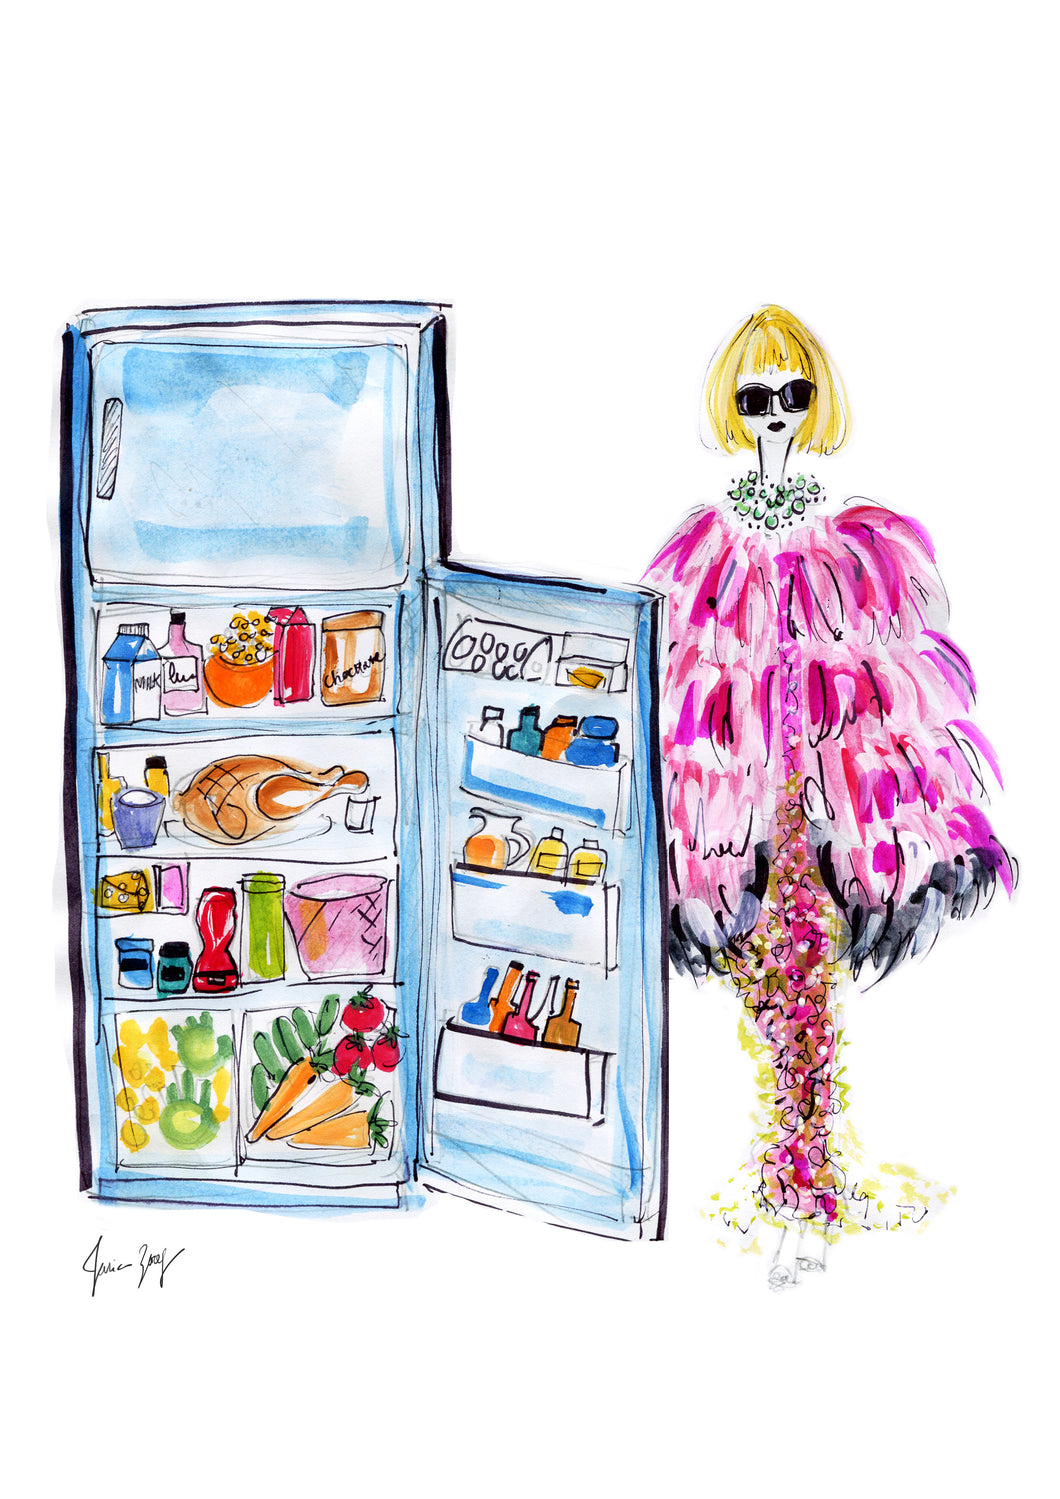 Full fridge with Anna Wintour in her pink Met Gala outfit, her glasses and necklace - digital art by Talia Zoref